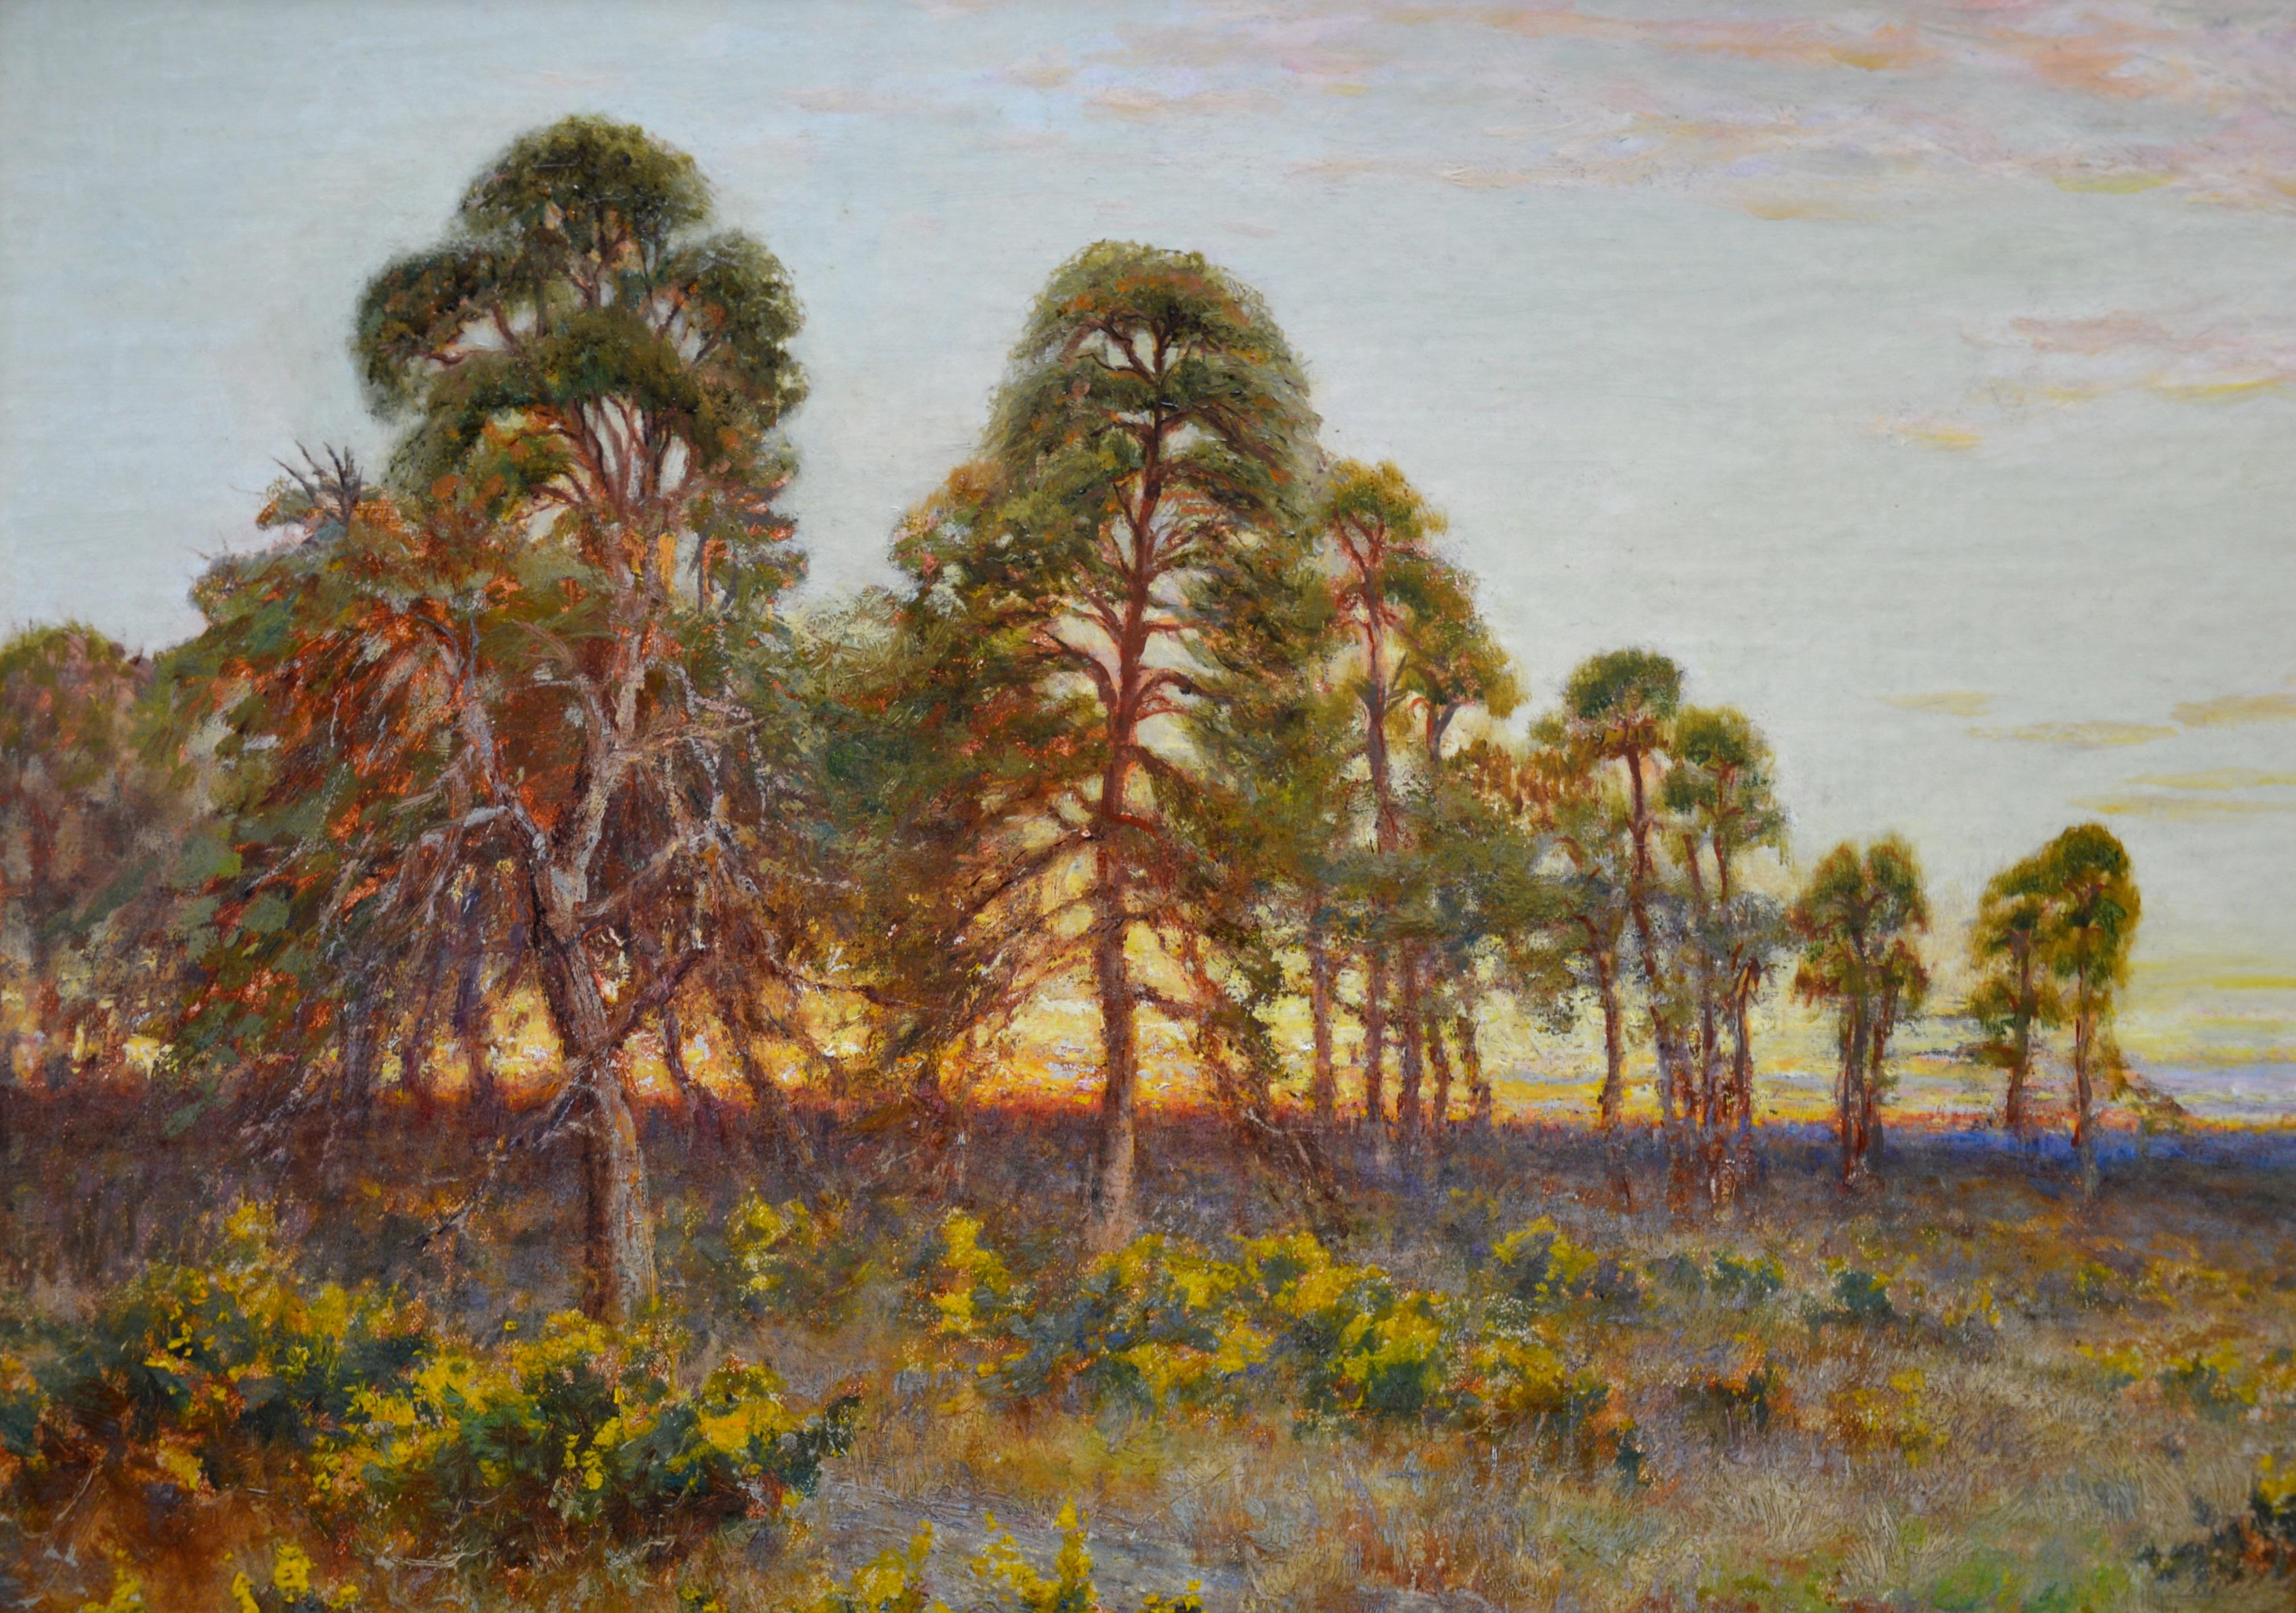 A fine 19th century landscape oil on canvas depicting a ‘Sunset on a Surrey Common’ by the listed English painter James Edward Townshend RBA (1861-1949). The painting is signed by the artist and hangs in a superb quality newly commissioned, bespoke